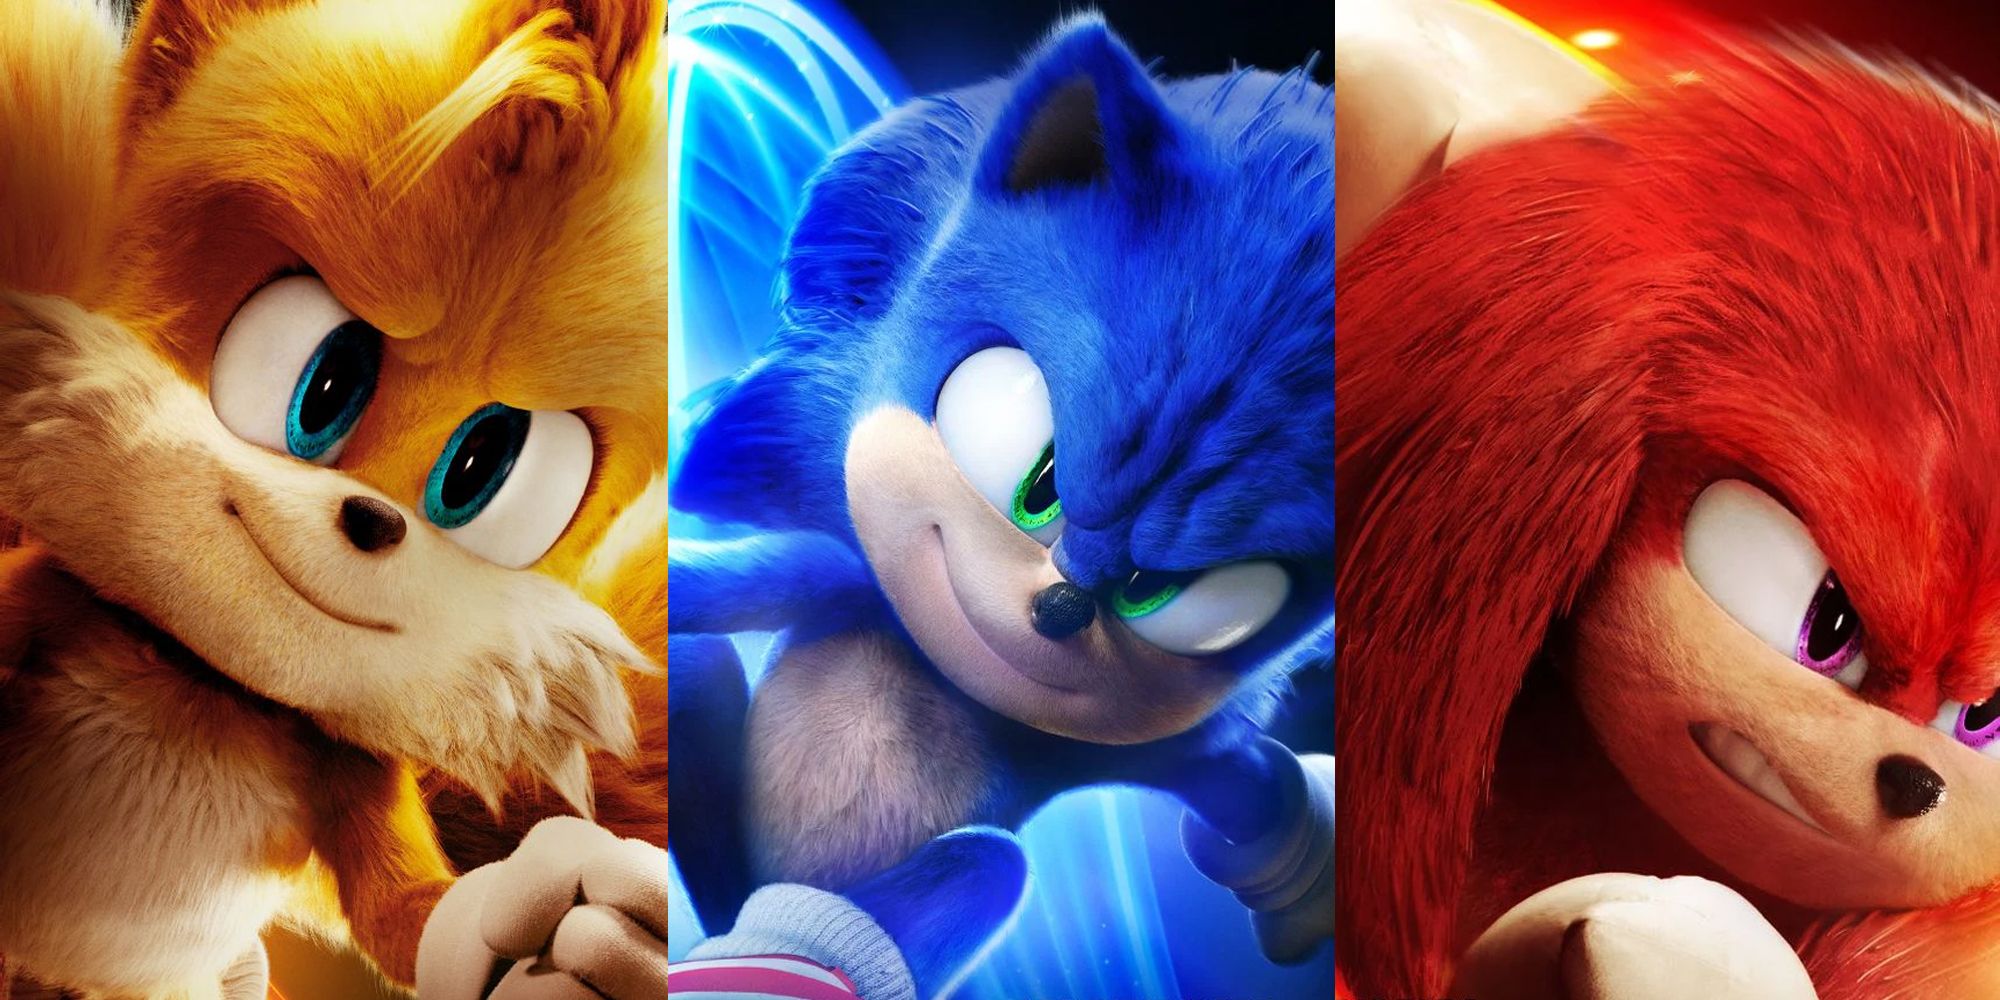 Idris Elba's Knuckles Is Ready For Battle in Sonic 2 Character Posters